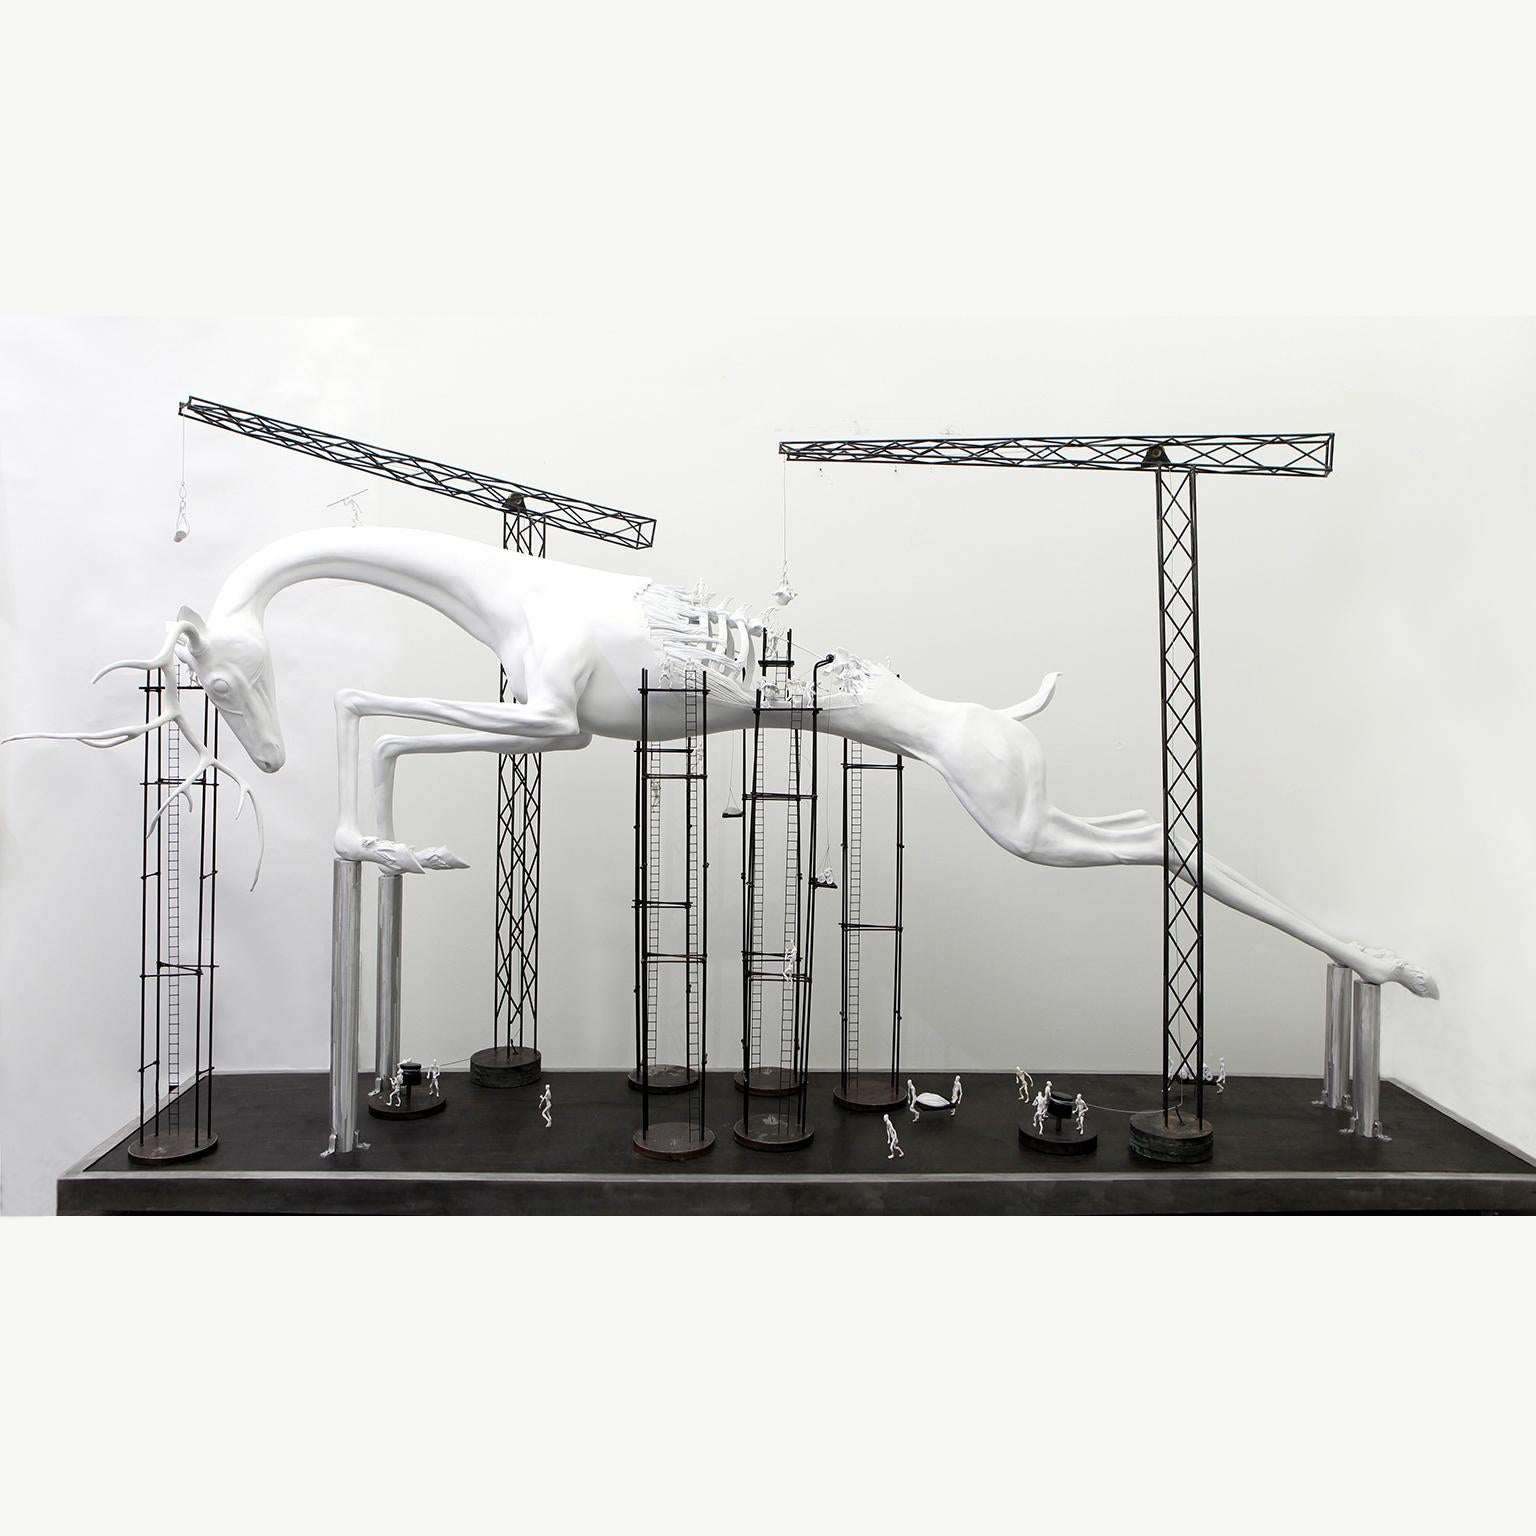 The Stag by Hobbes Vincent is an original steel, plaster and resin sculpture. 
84 × 168 × 48 inch; 213.4 × 426.7 × 121.9 cm

This sculpture features a stag and building cranes and workers who appear to be assembling the stag piece by piece. 

This